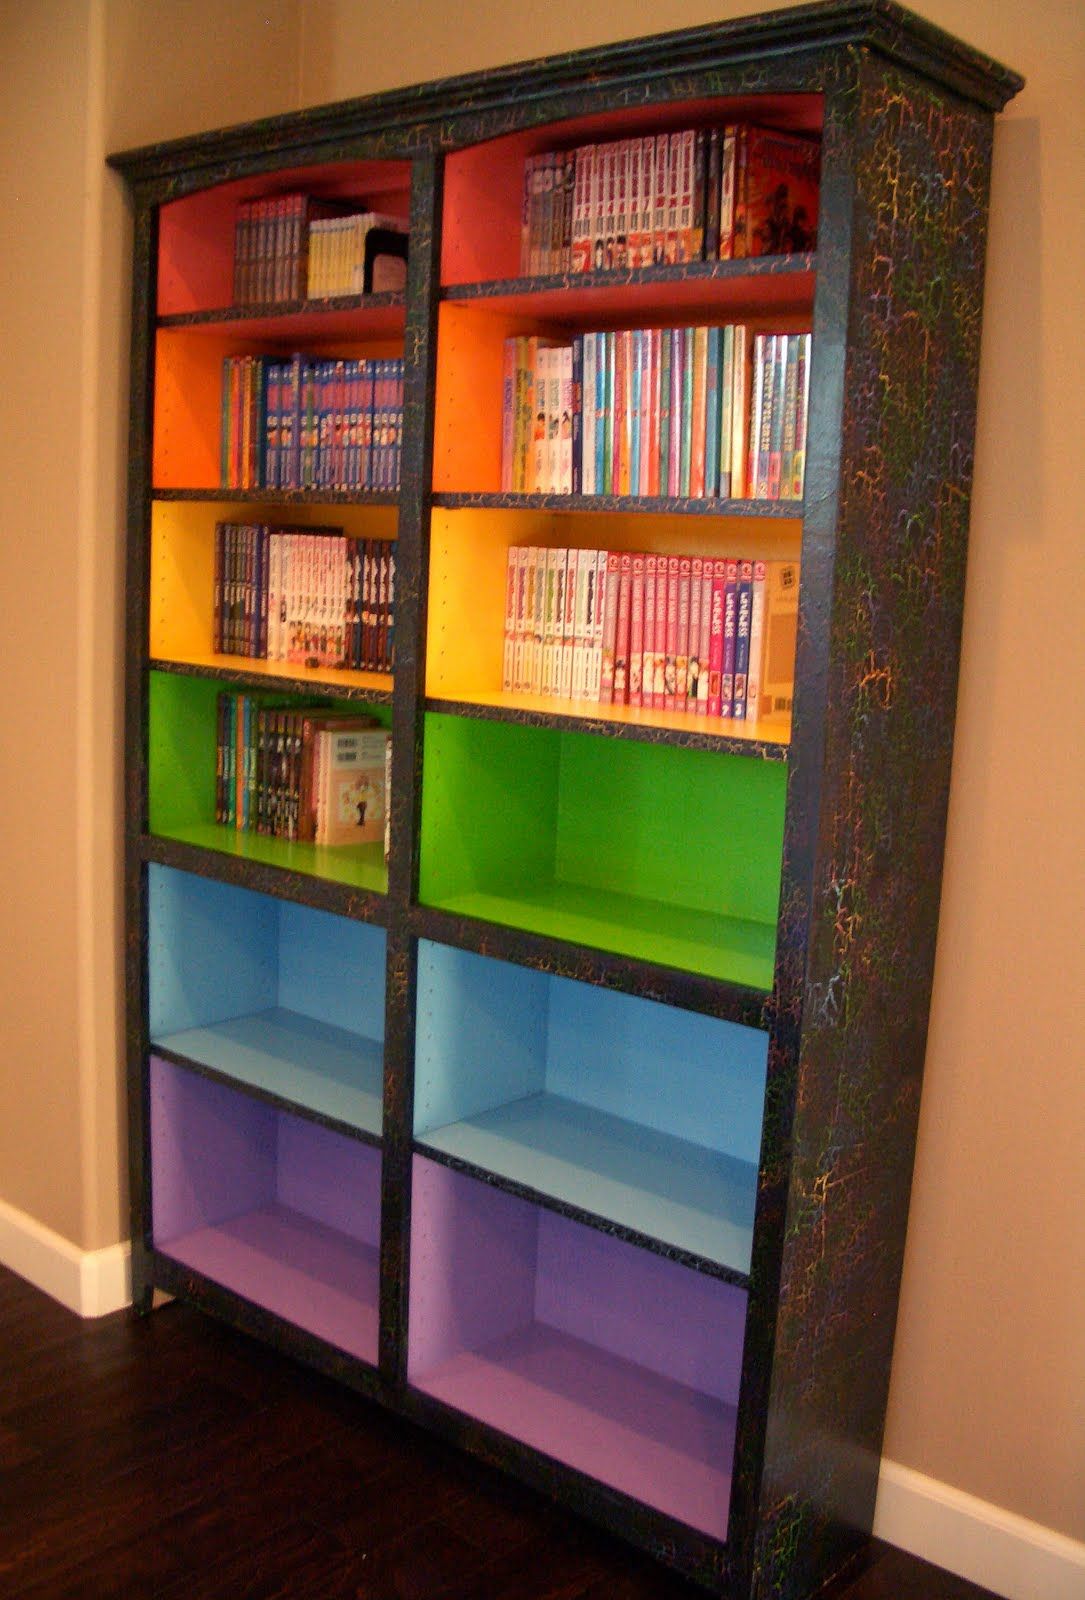 Each colored shelf for different reading levels (instead of stickers and the boo